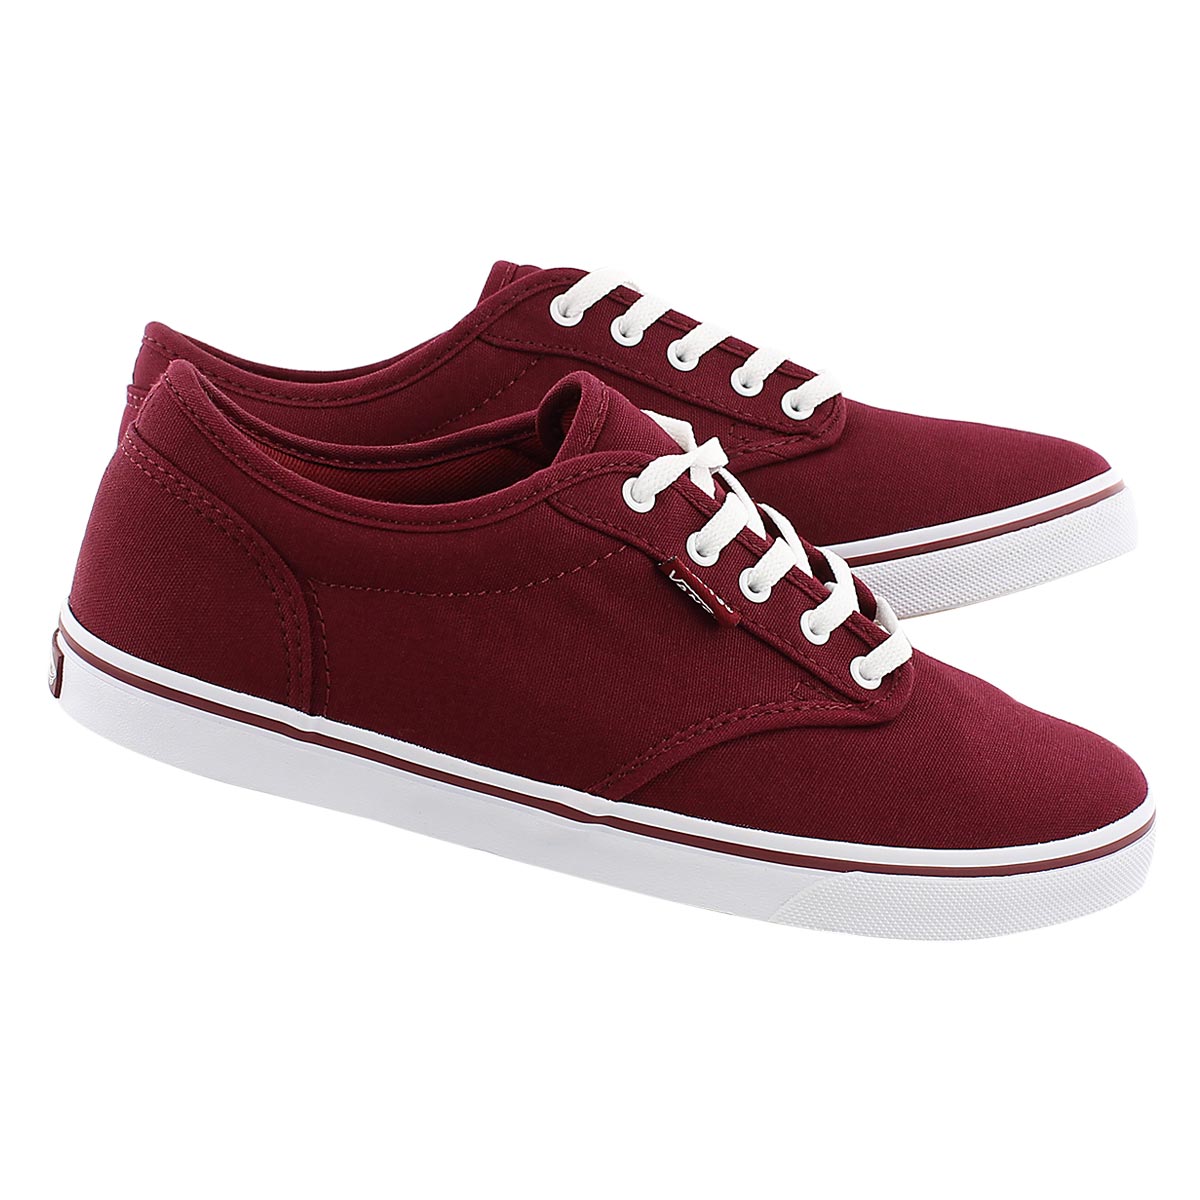 Vans Women's ATWOOD LOW burgundy lace up sneakers